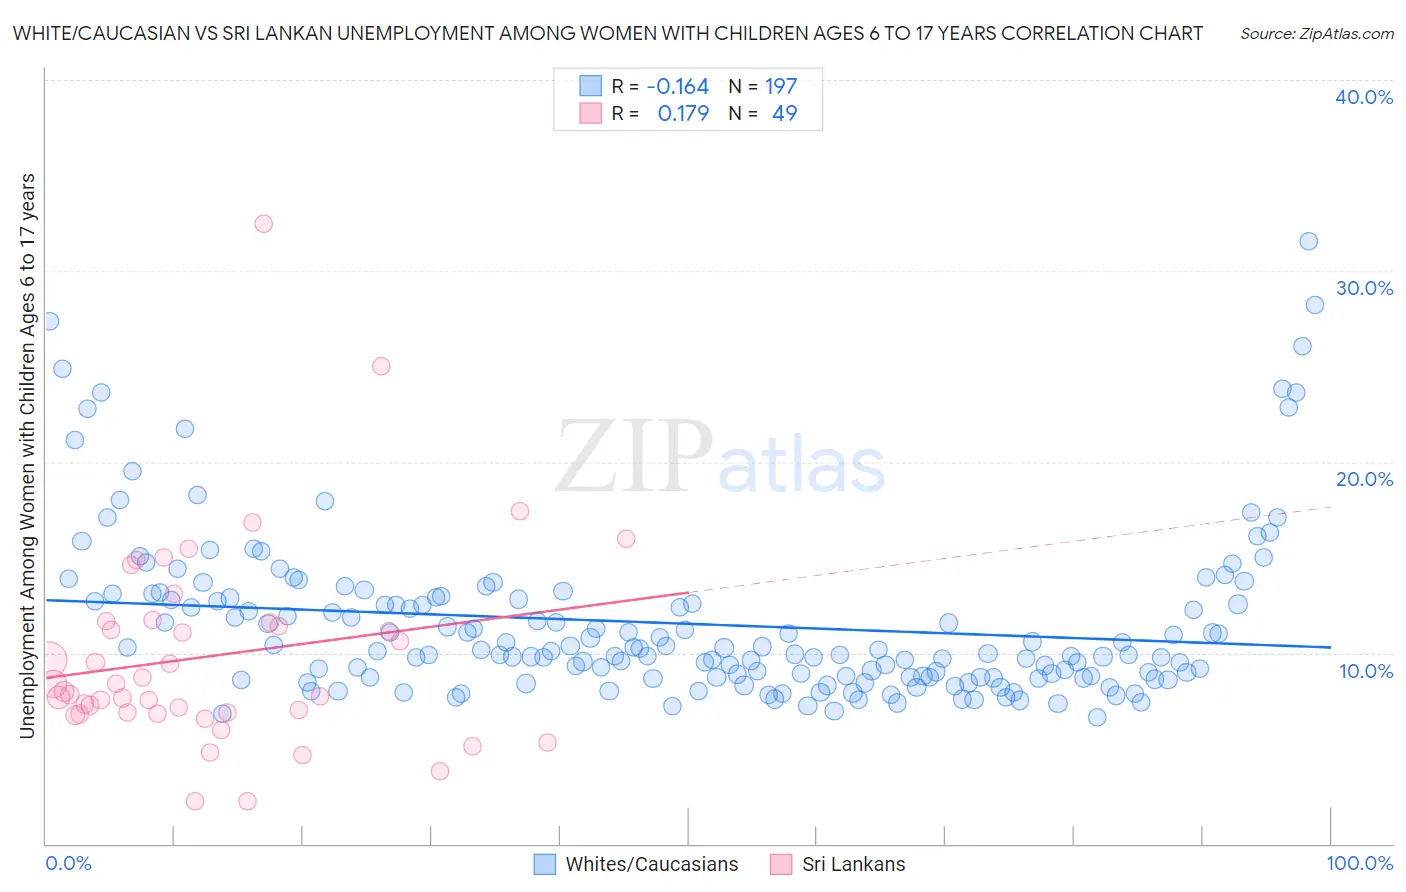 White/Caucasian vs Sri Lankan Unemployment Among Women with Children Ages 6 to 17 years